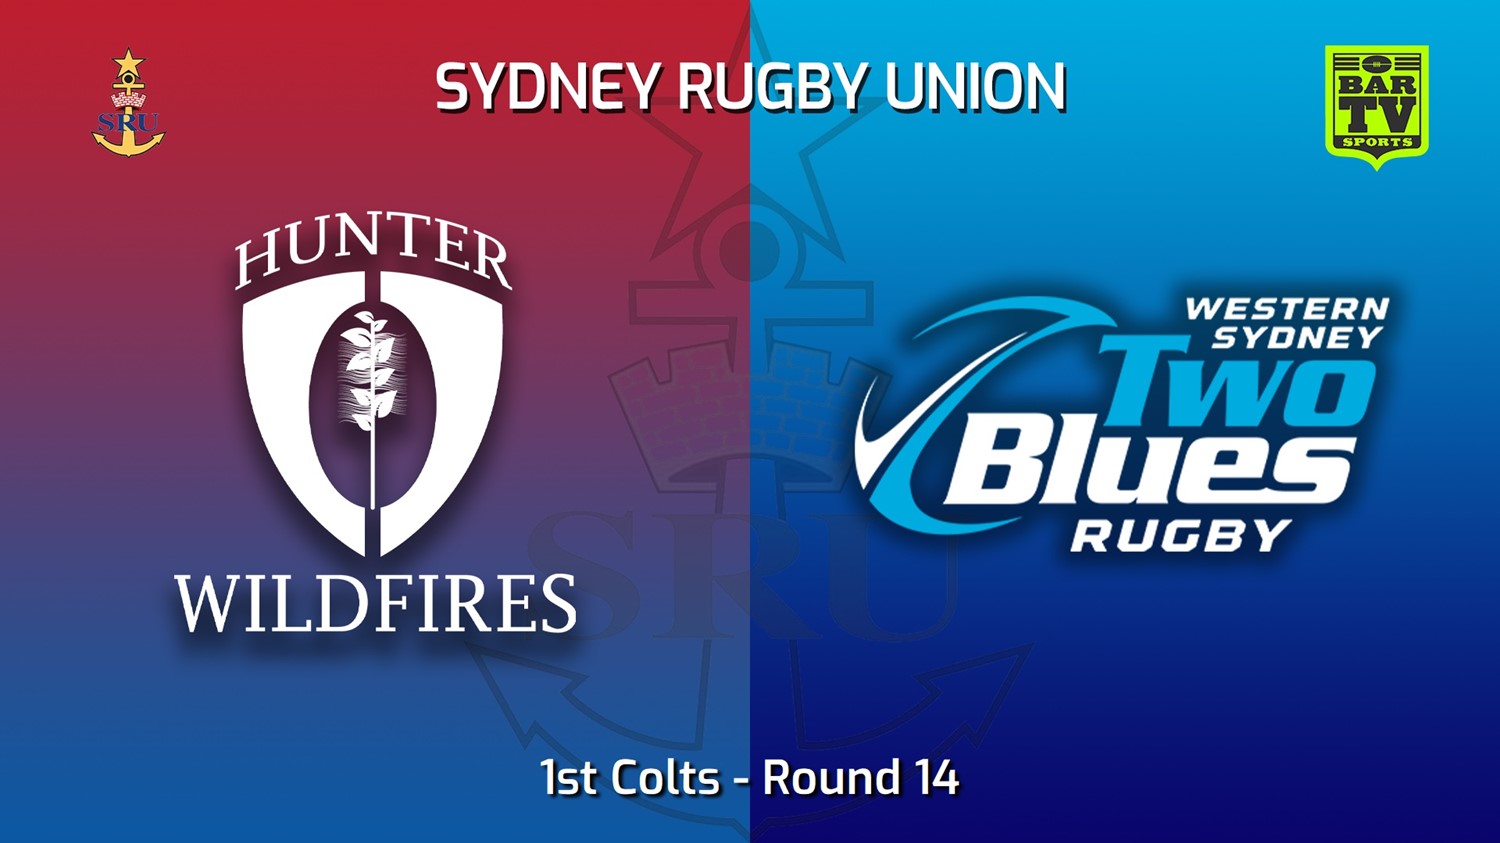 220709-Sydney Rugby Union Round 14 - 1st Colts - Hunter Wildfires v Two Blues (1) Slate Image